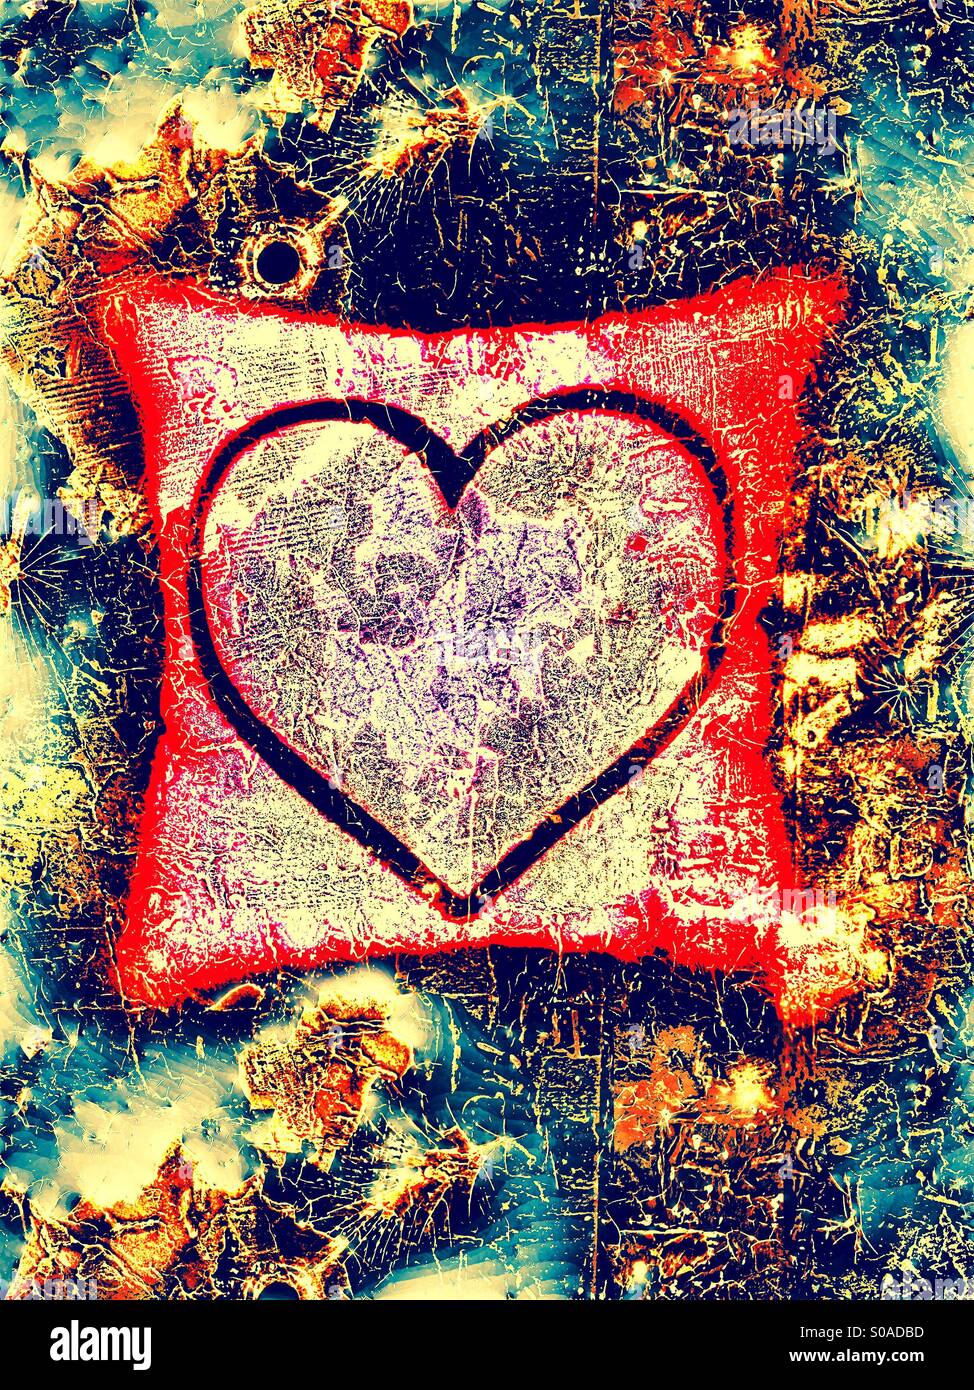 Red and black heart pillow with texture and grunge effects added for a semi-abstract look Stock Photo